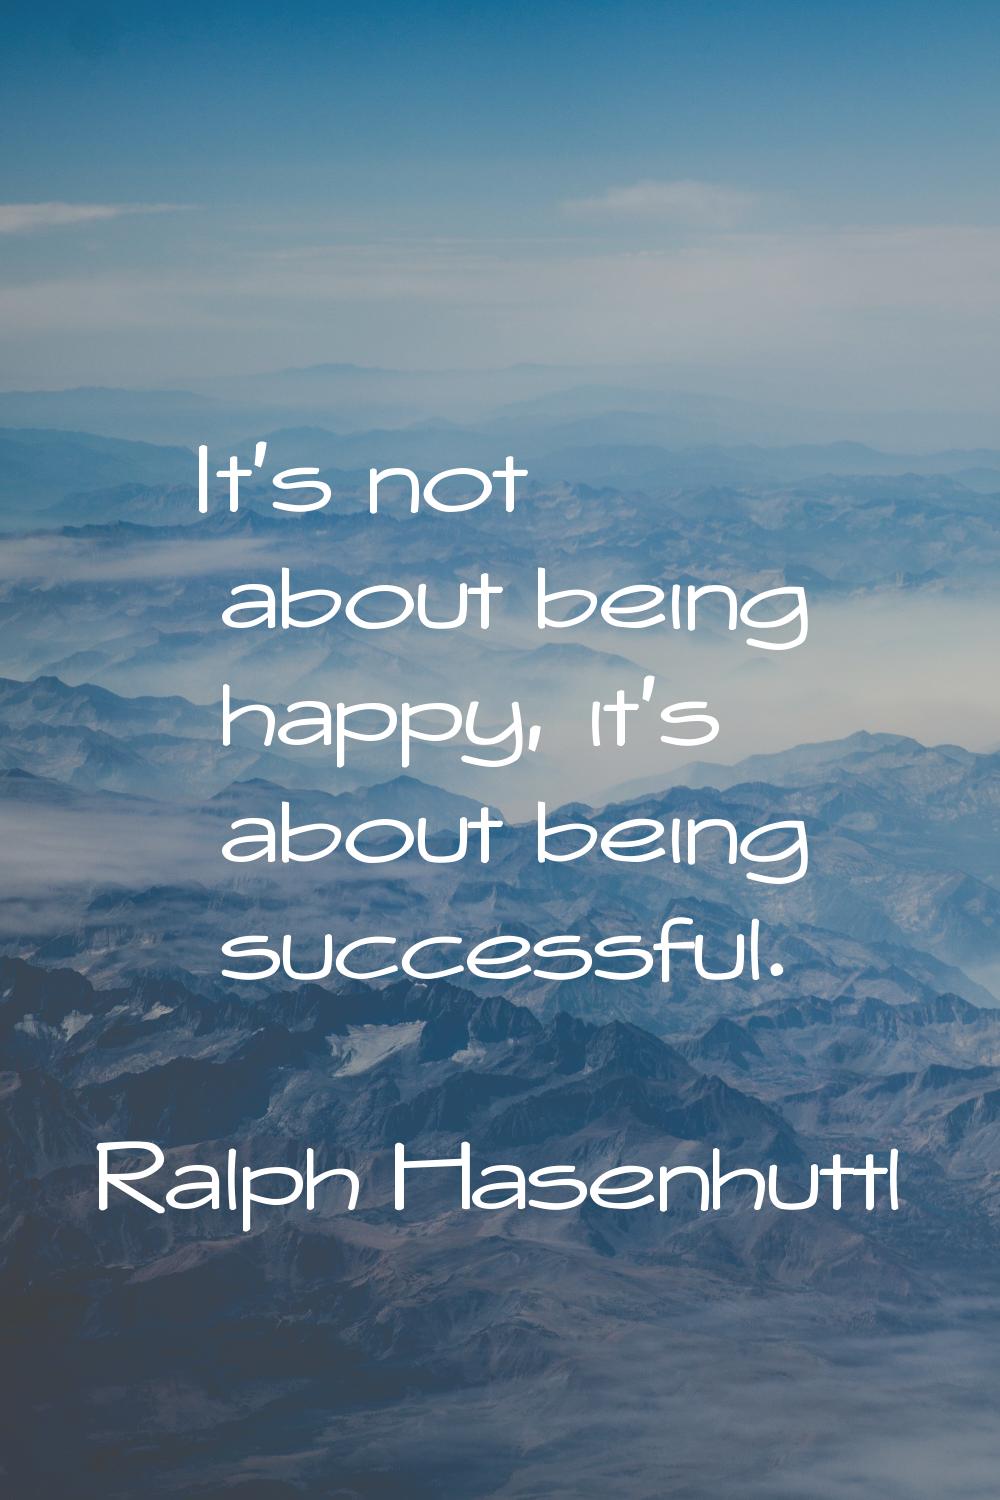 It's not about being happy, it's about being successful.